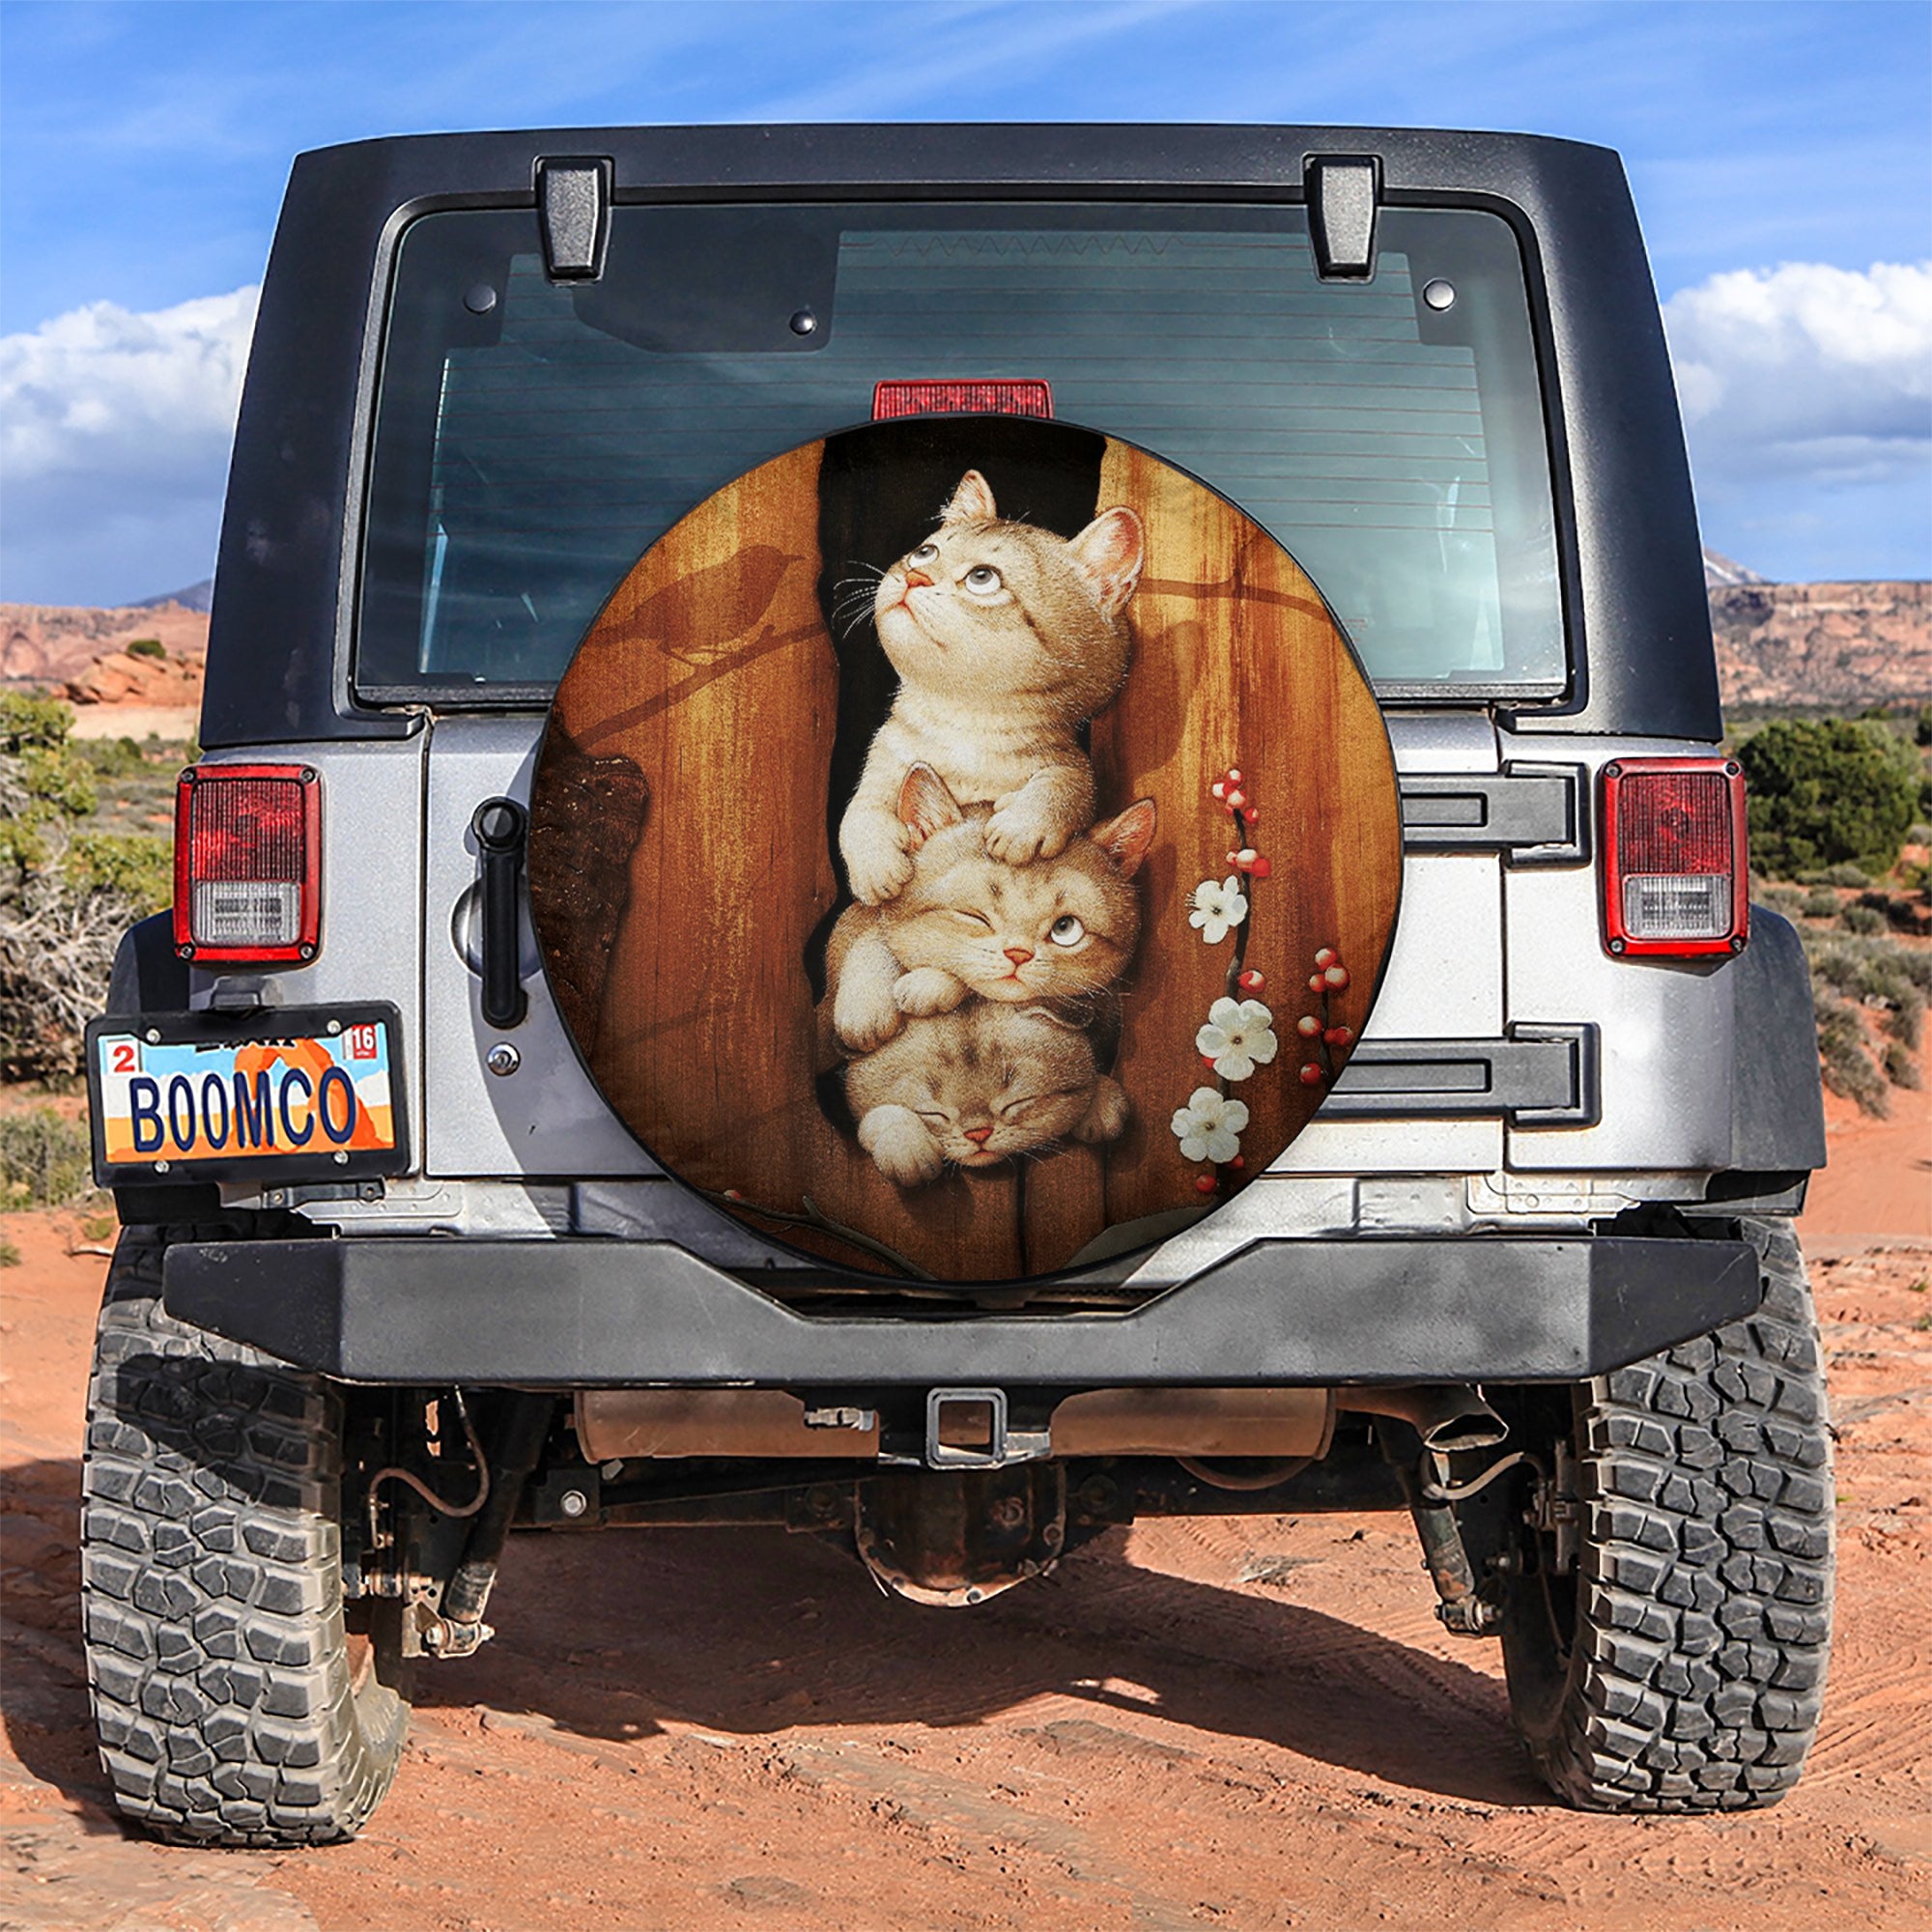 Cute Kitty Cat Wooden Car Spare Tire Covers Gift For Campers Nearkii